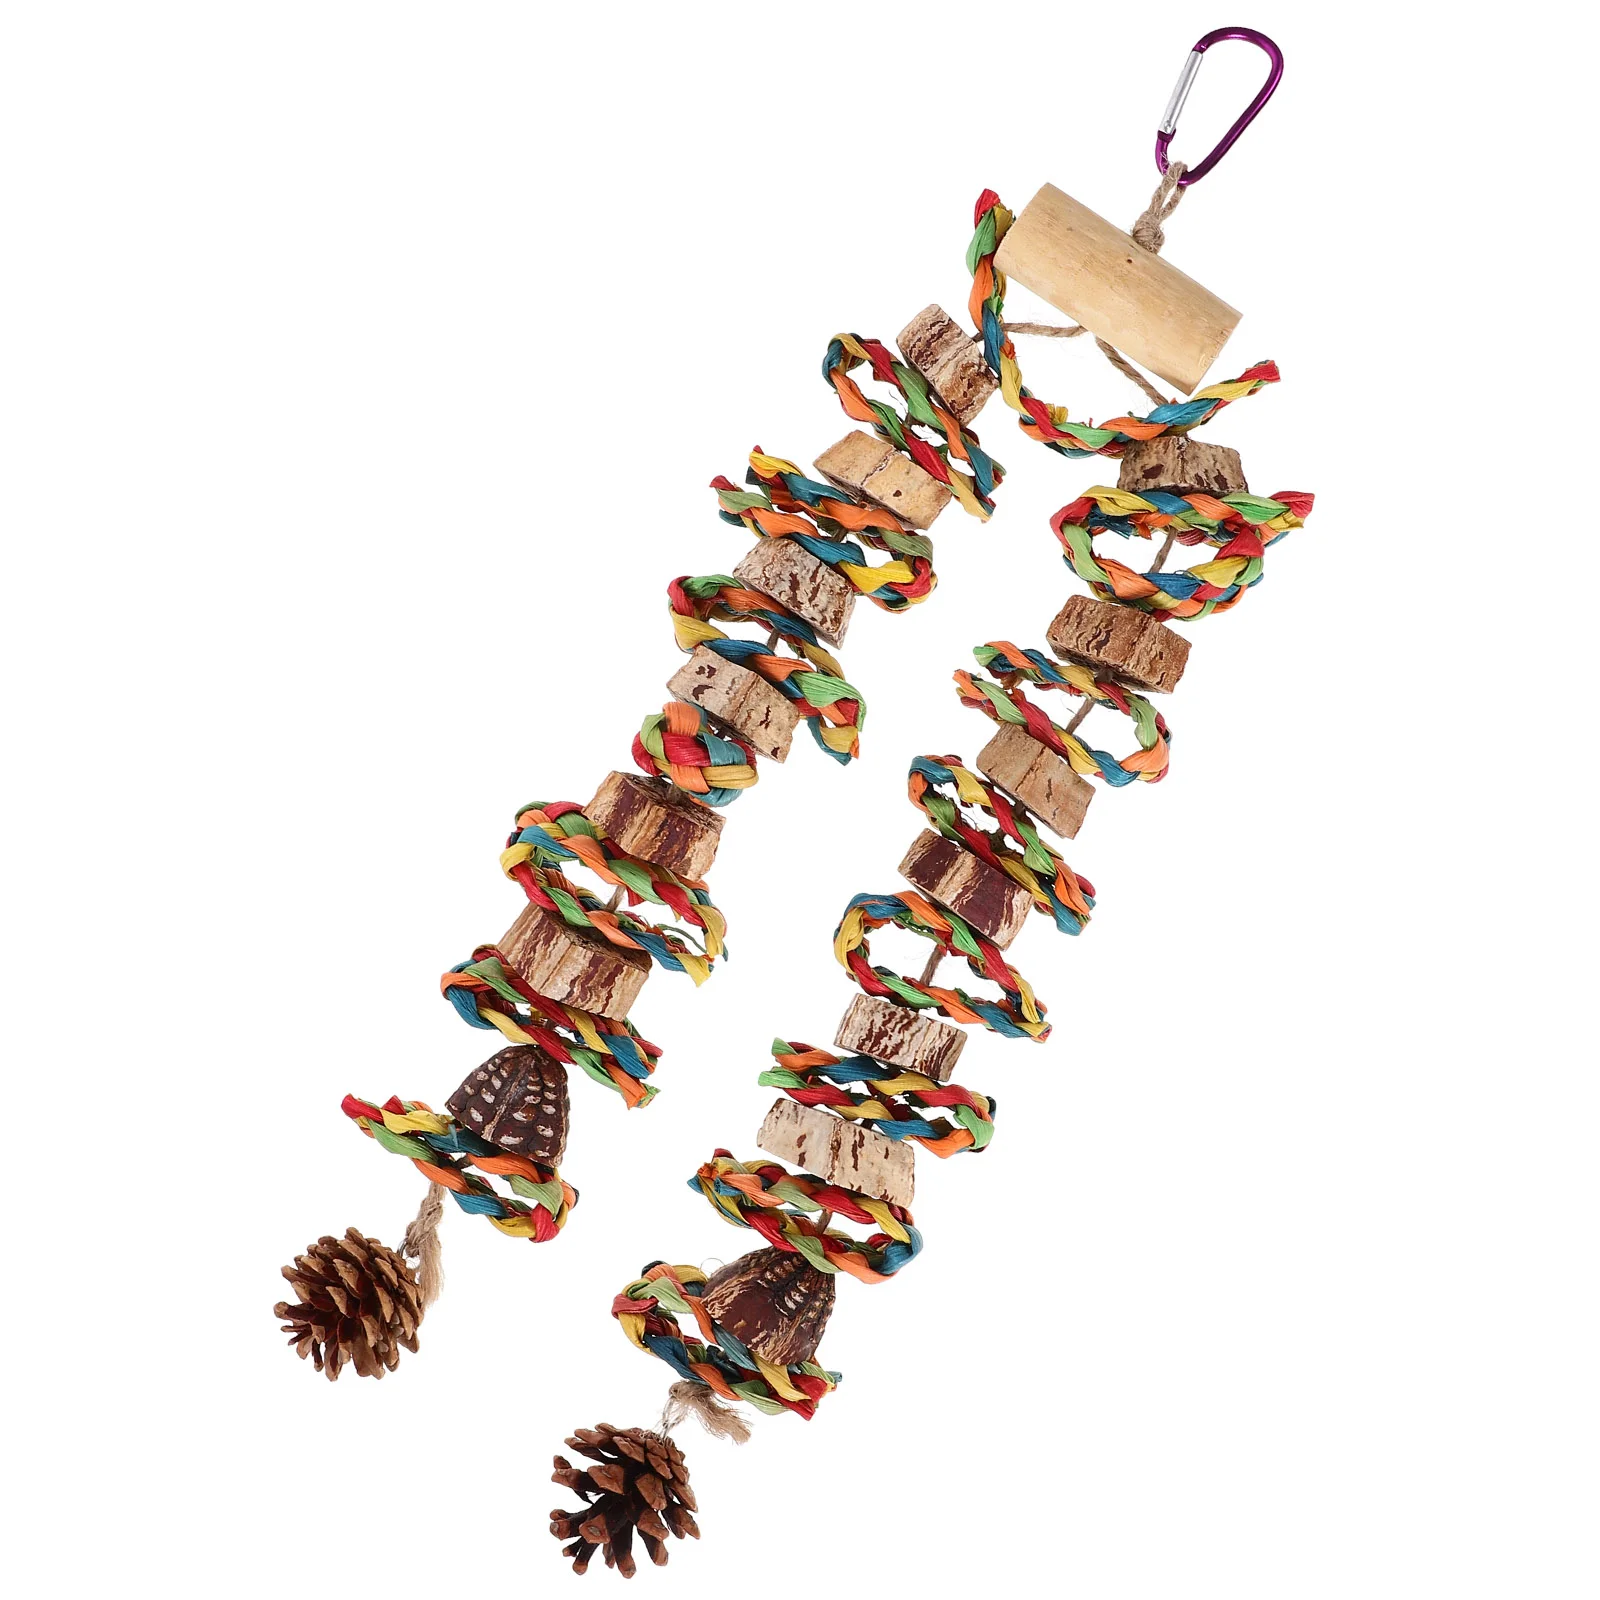 

Bird Parrot Toy The Birdcage Carambola Biting Hanging Chew Wooden Bite Toys Teething